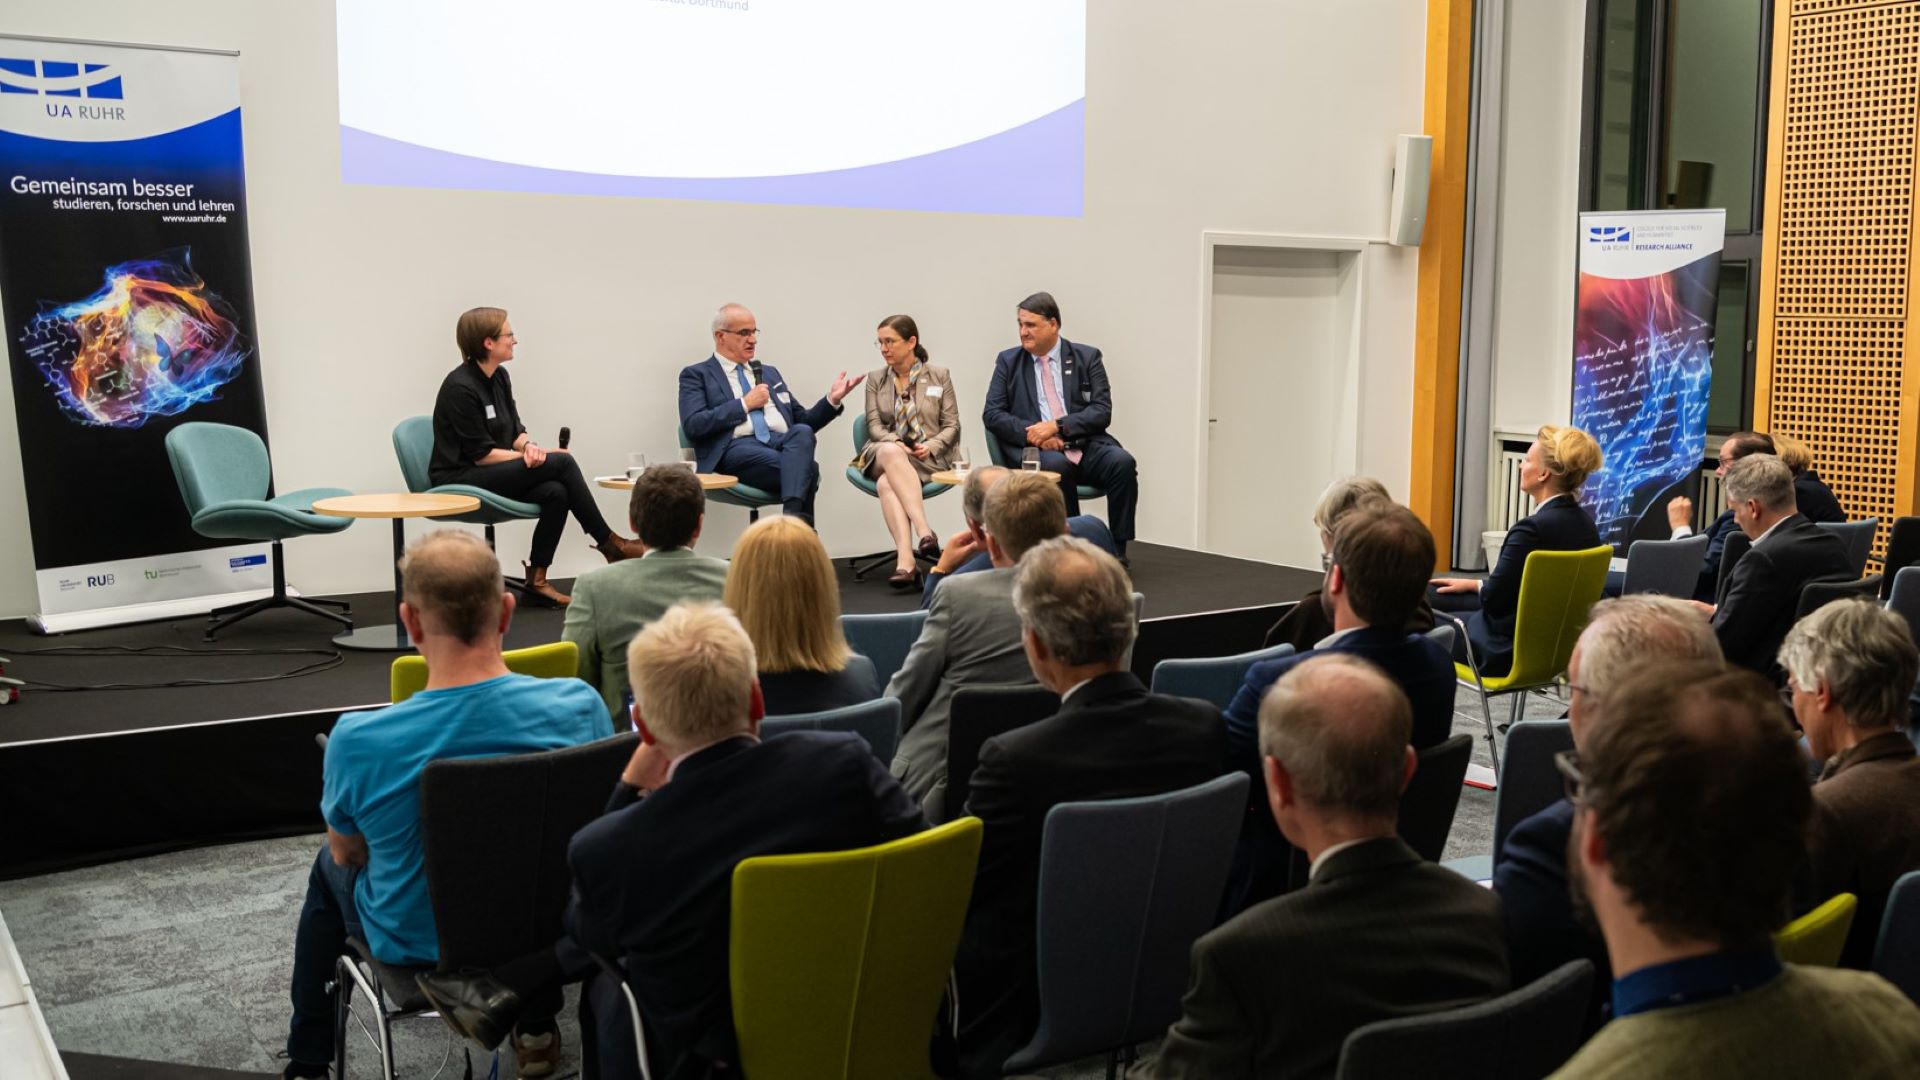 Panel discussion with rectors of the three UA Ruhr universities